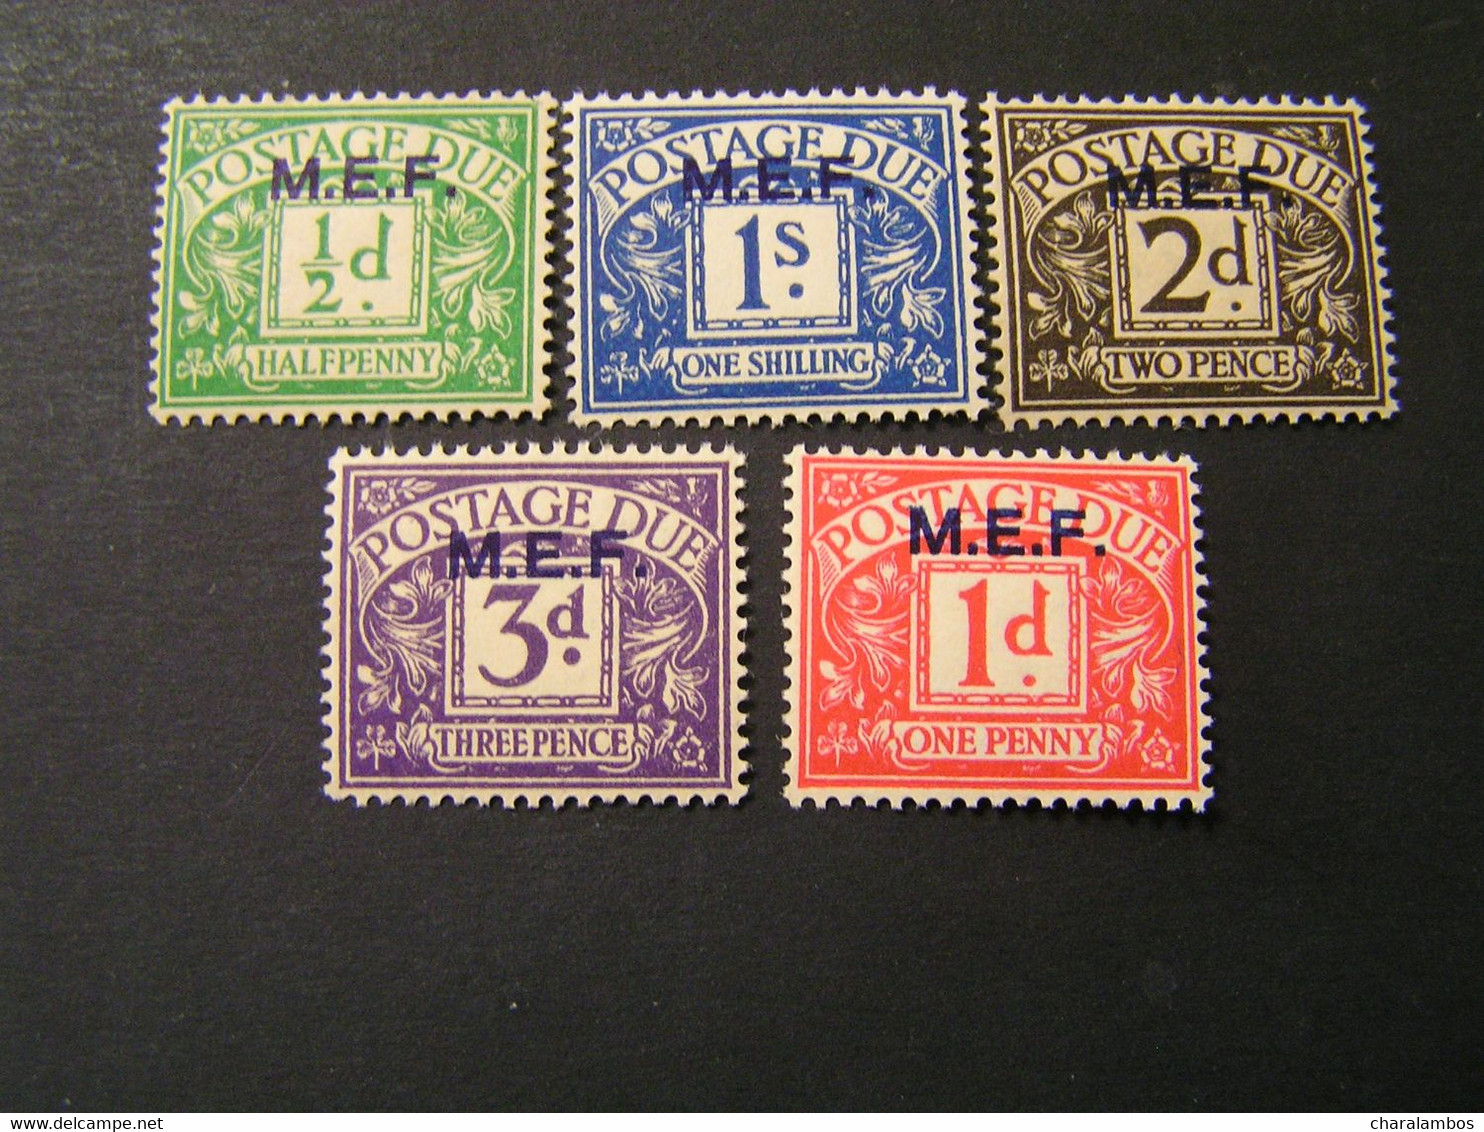 GREECE 1945 BRITISH MILITARY ADMINISTRATION ISSE M.E.F. Overprints Definitive+Postage Dues MNH.. - Dodekanisos